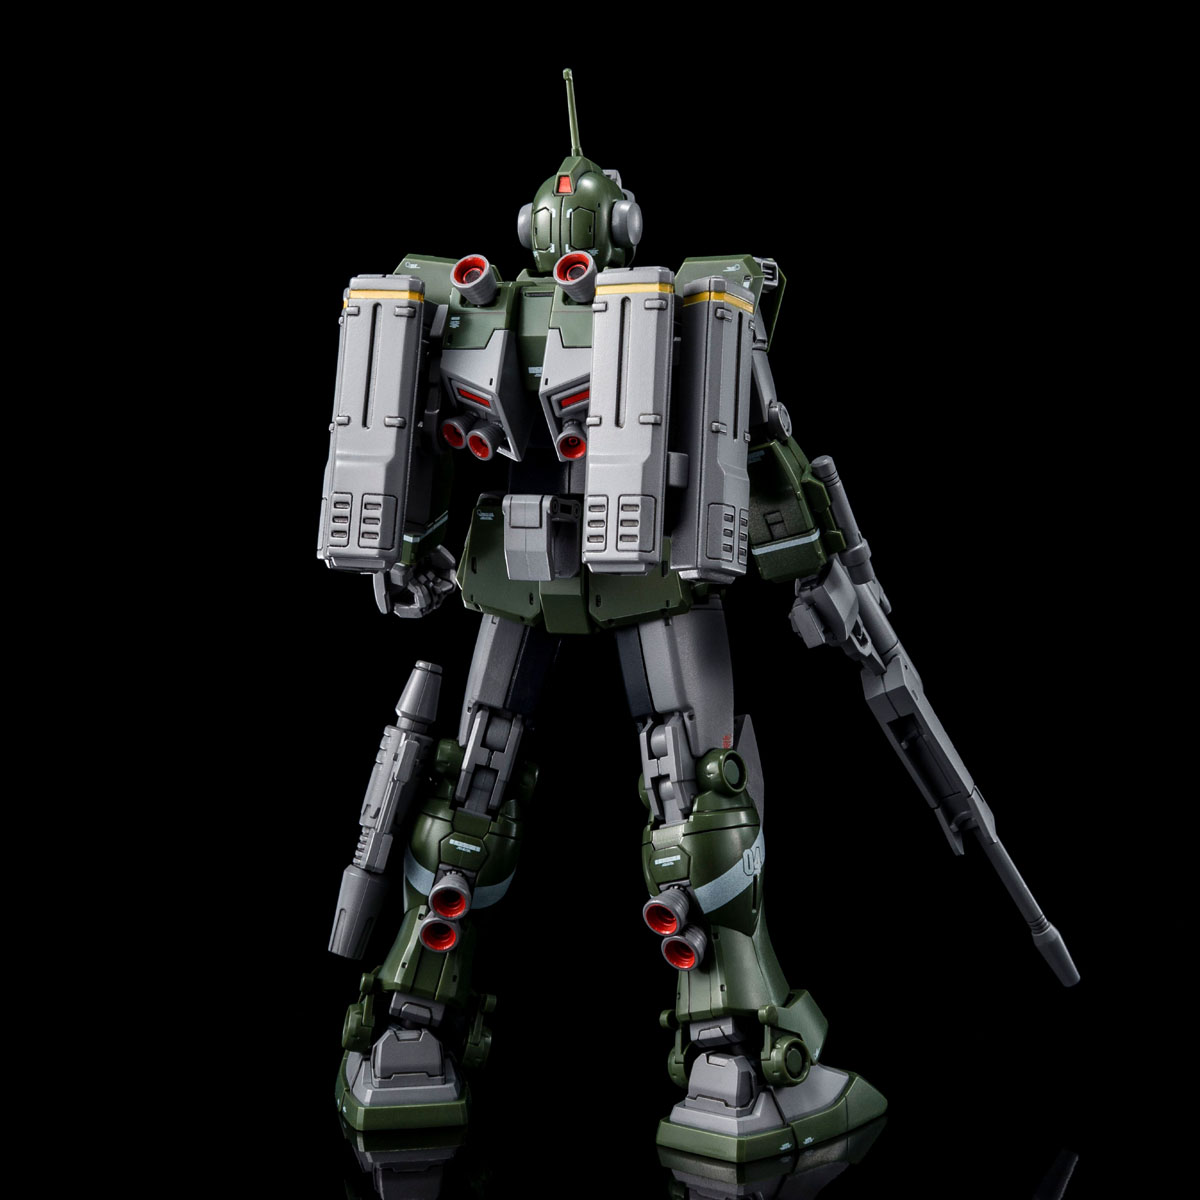 HG 1/144 GM SNIPER CUSTOM (with MISSILE LAUNCHER)